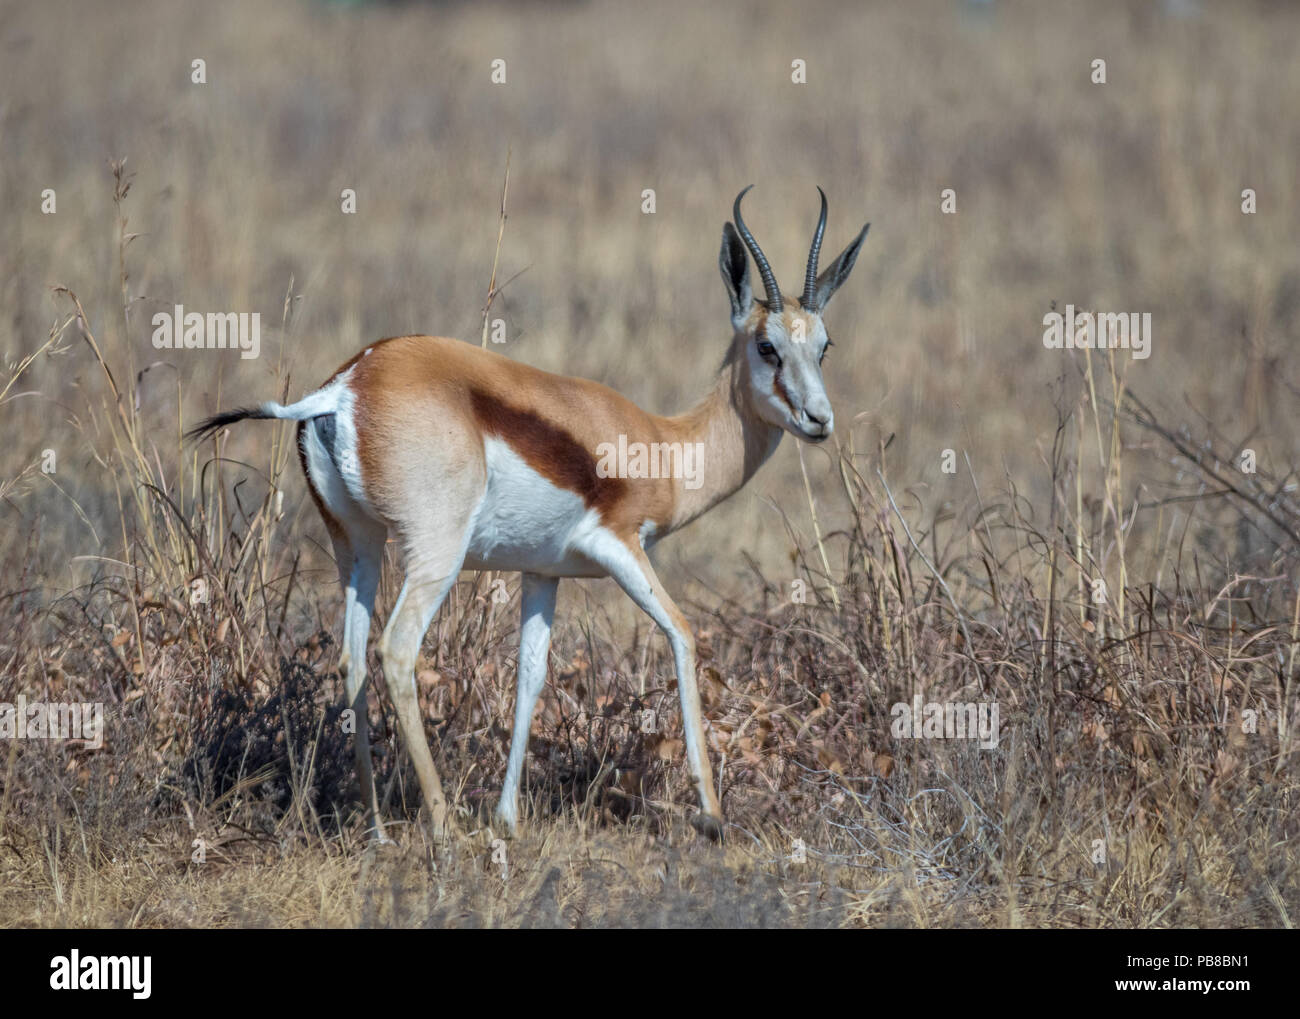 The springbok is a medium-sized antelope found mainly in southern and southwestern Africa image in landscape format with copy space Stock Photo